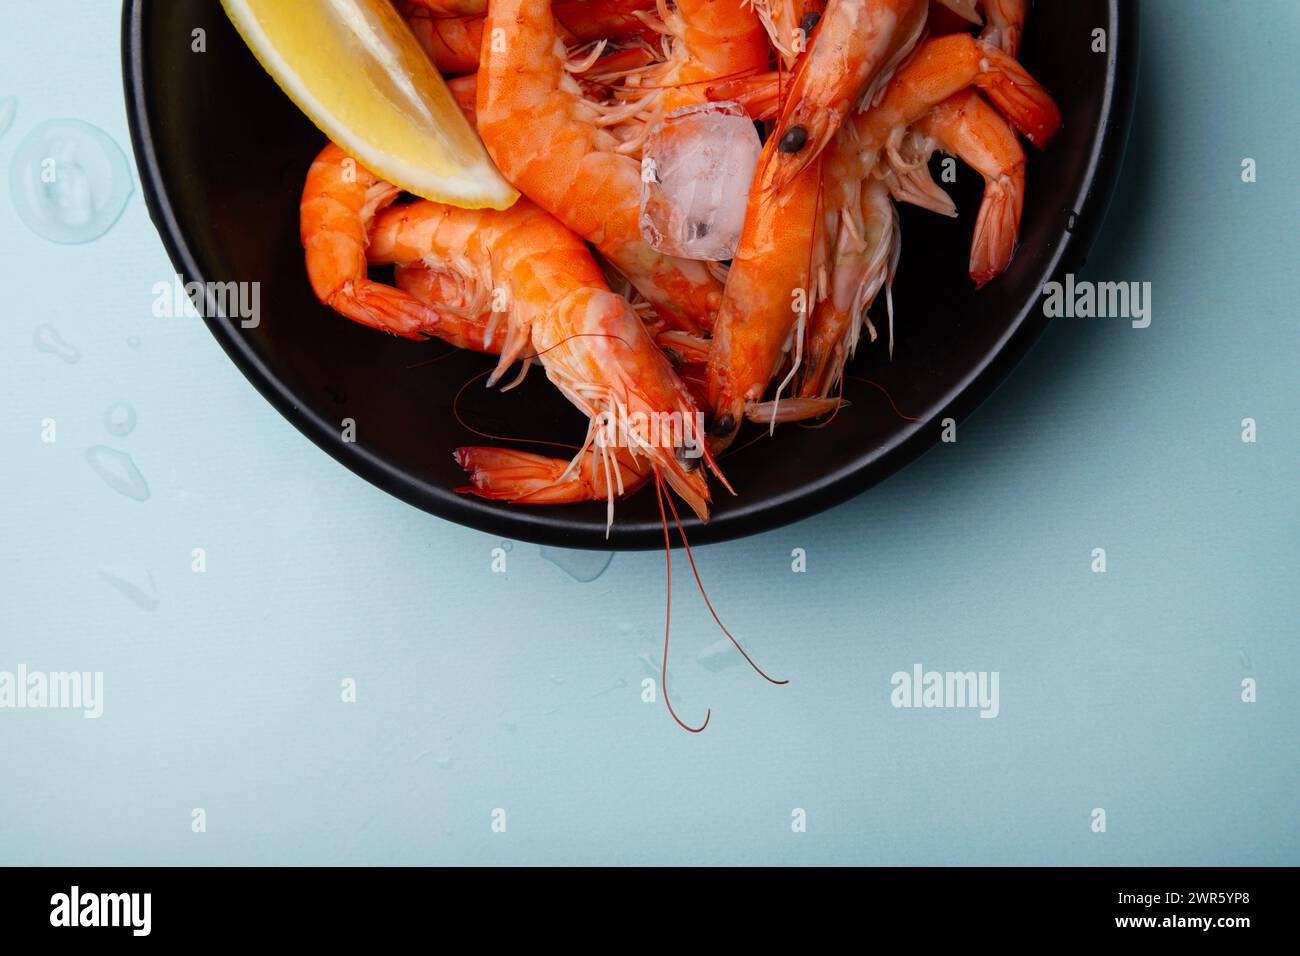 Bowl full of defrosted cooked prawns with lemon wedges, on a blue background with droplets of water. Ideal for culinary websites or seafood recipes. Stock Photo